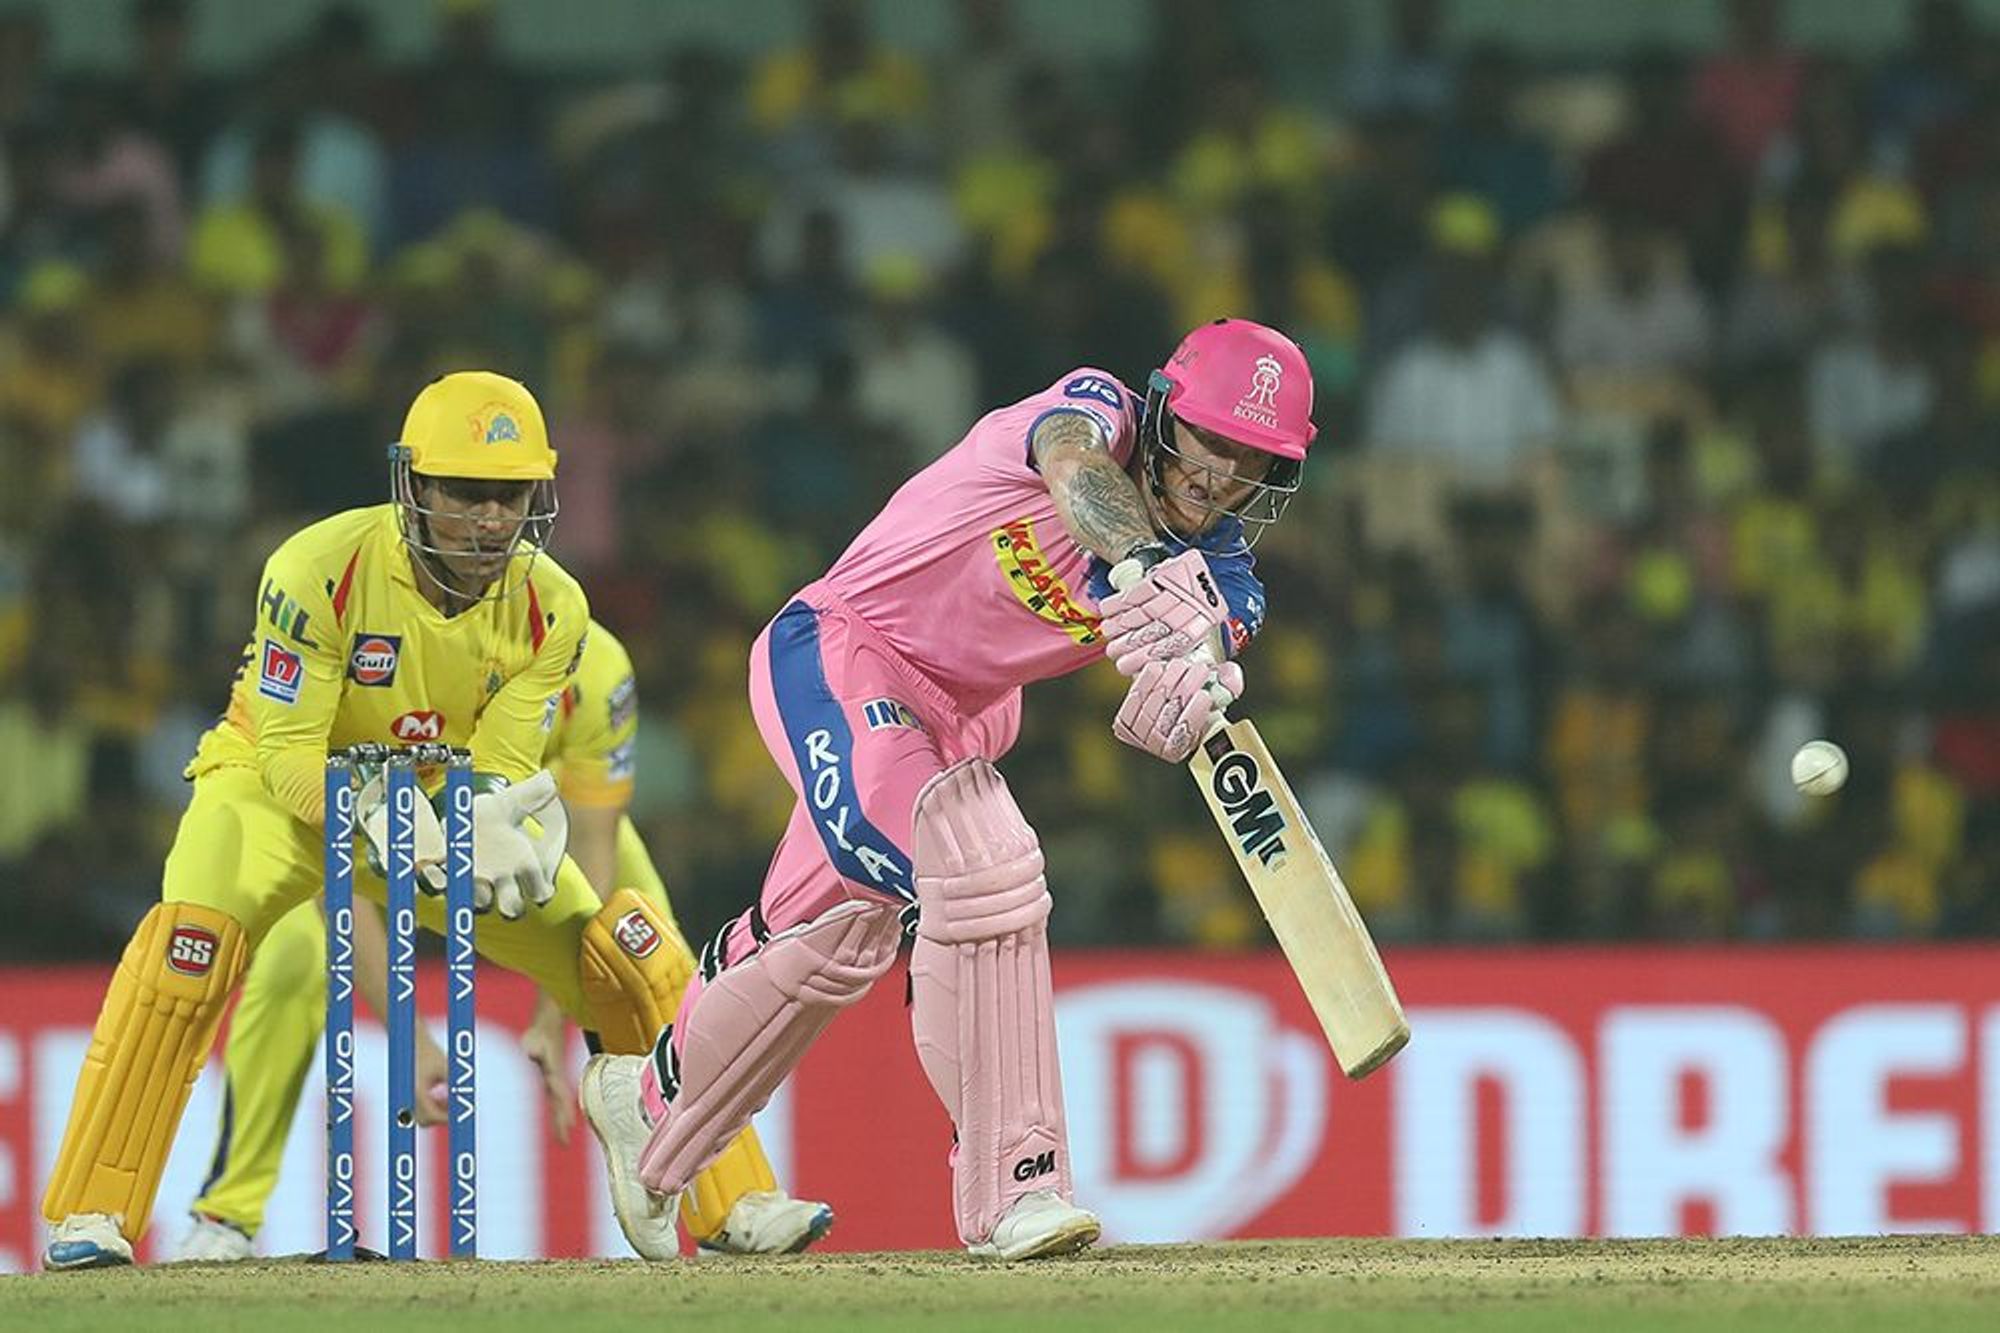 IPL 2019 | Player Ratings - Lack of control, situational awareness result in another heart-breaking defeat for Rajasthan Royals